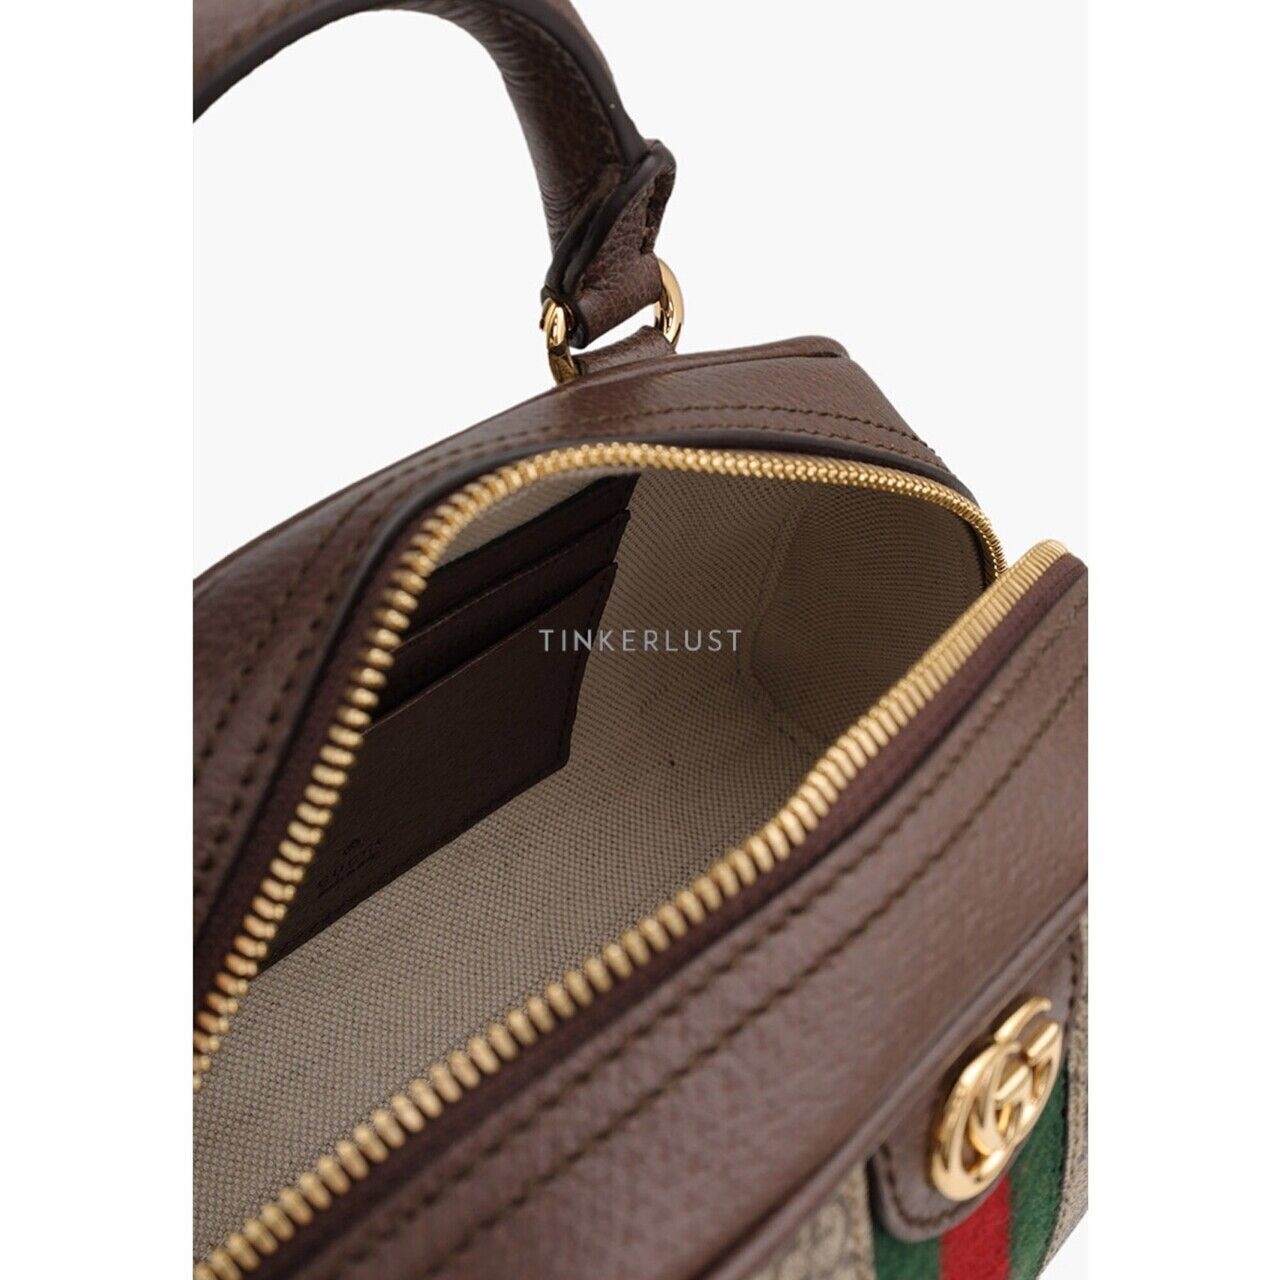 Gucci Mini GG Supreme Ophidia In Beige/Ebony with Detachable Strap Top Handle Satchel Bag 